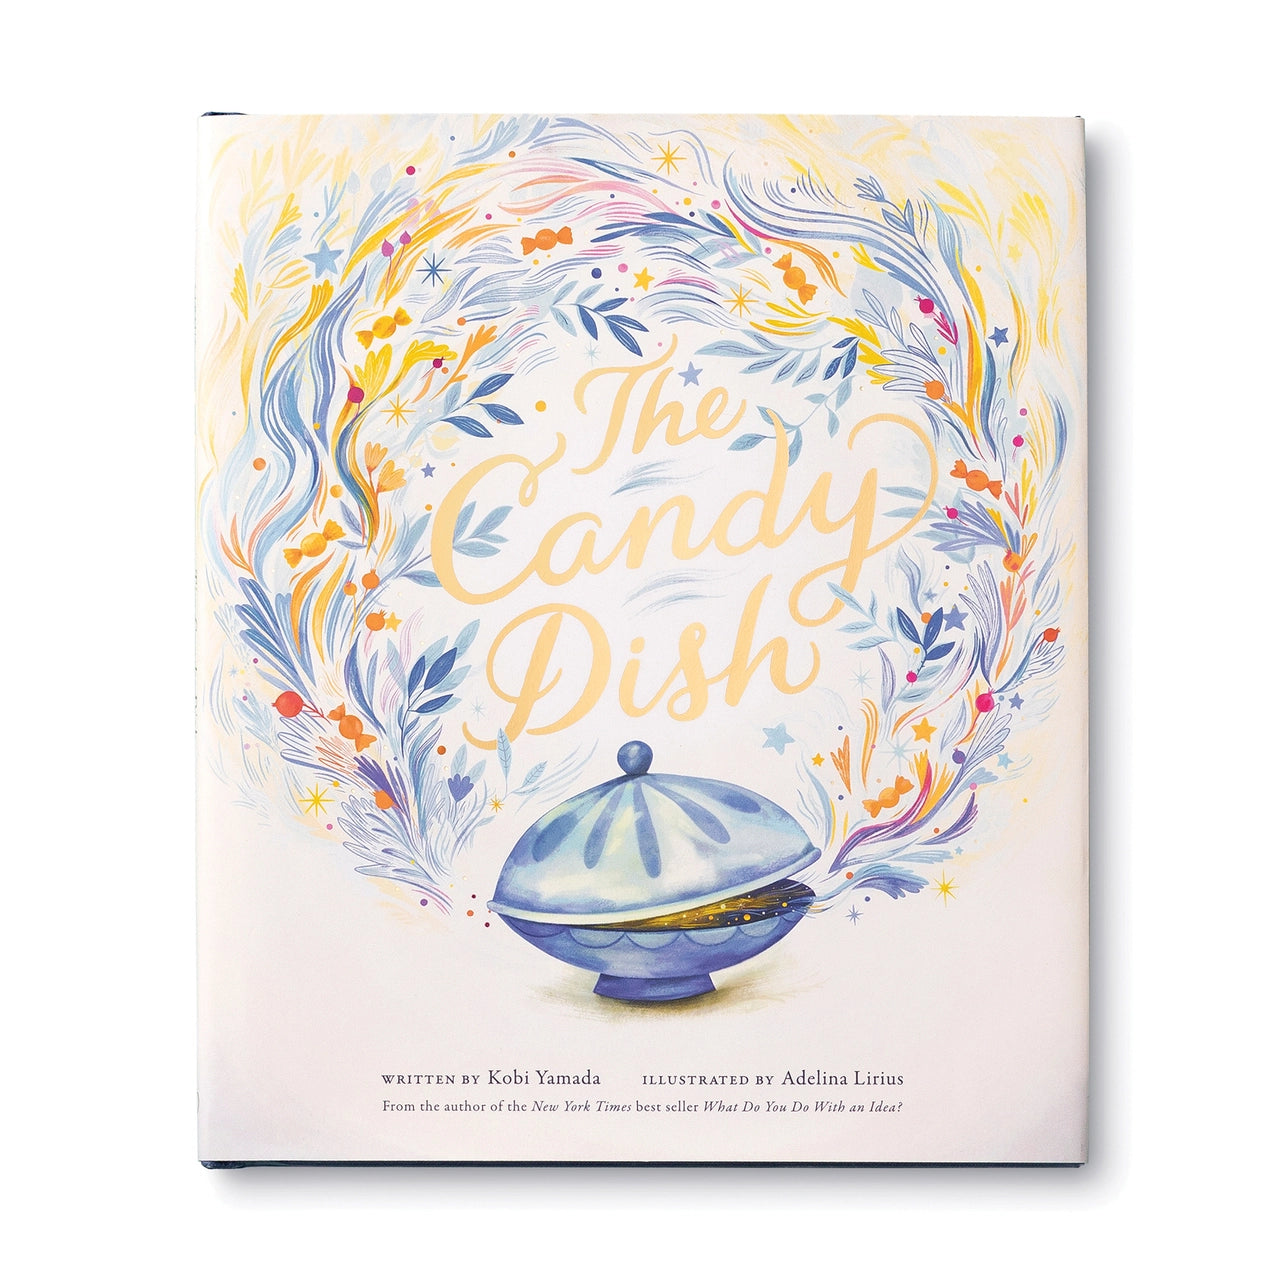 Book (Hardcover) - The Candy Dish